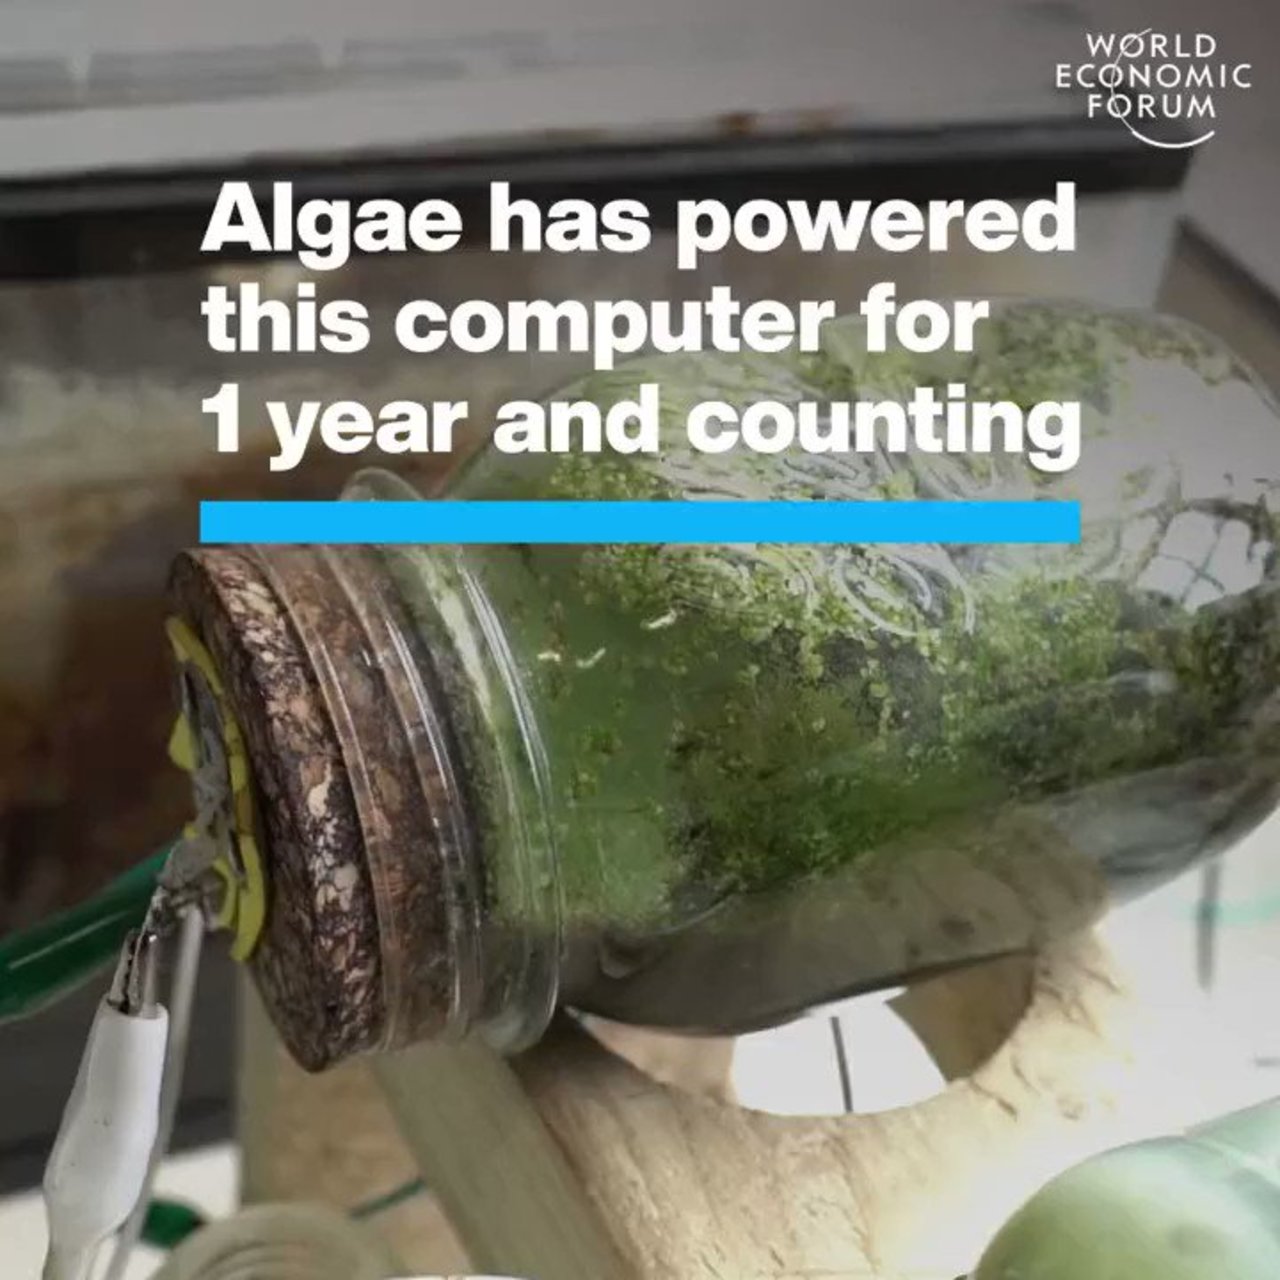 Algae has powered this computer for 1 year and counting by @wef #AI #ArtificialIntelligence #Innovation #Sustainability #Renewables #CleanEnergy #Tech #Technology cc: @ronald_vanloon @pbalakrishnarao @chr1sa https://t.co/9xj30asv77